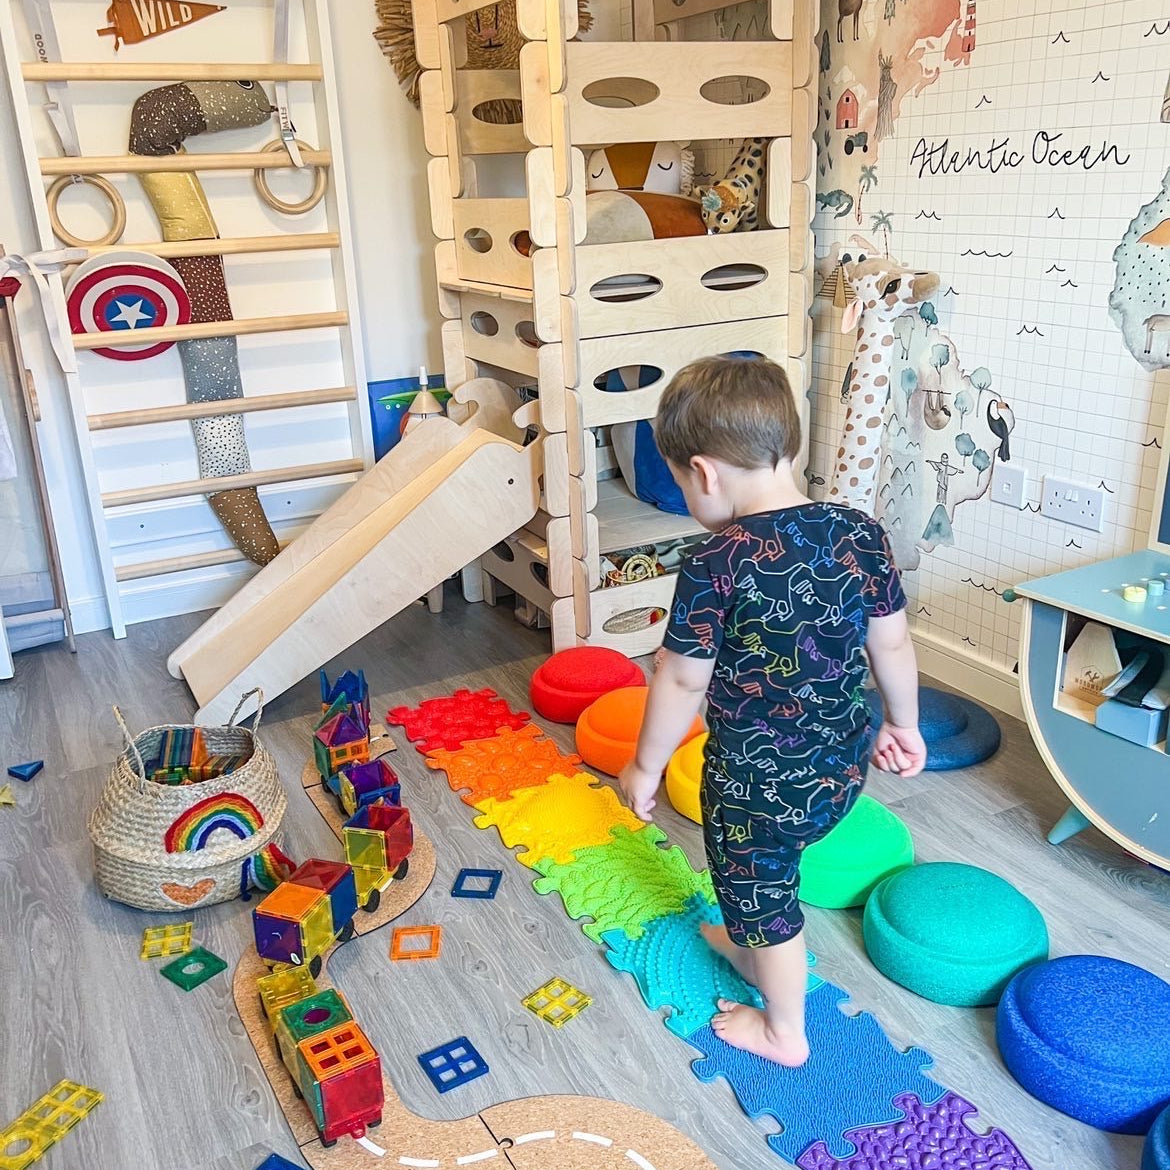 Playroom furniture designed by orthopaedic experts | Happy Feet Play mats